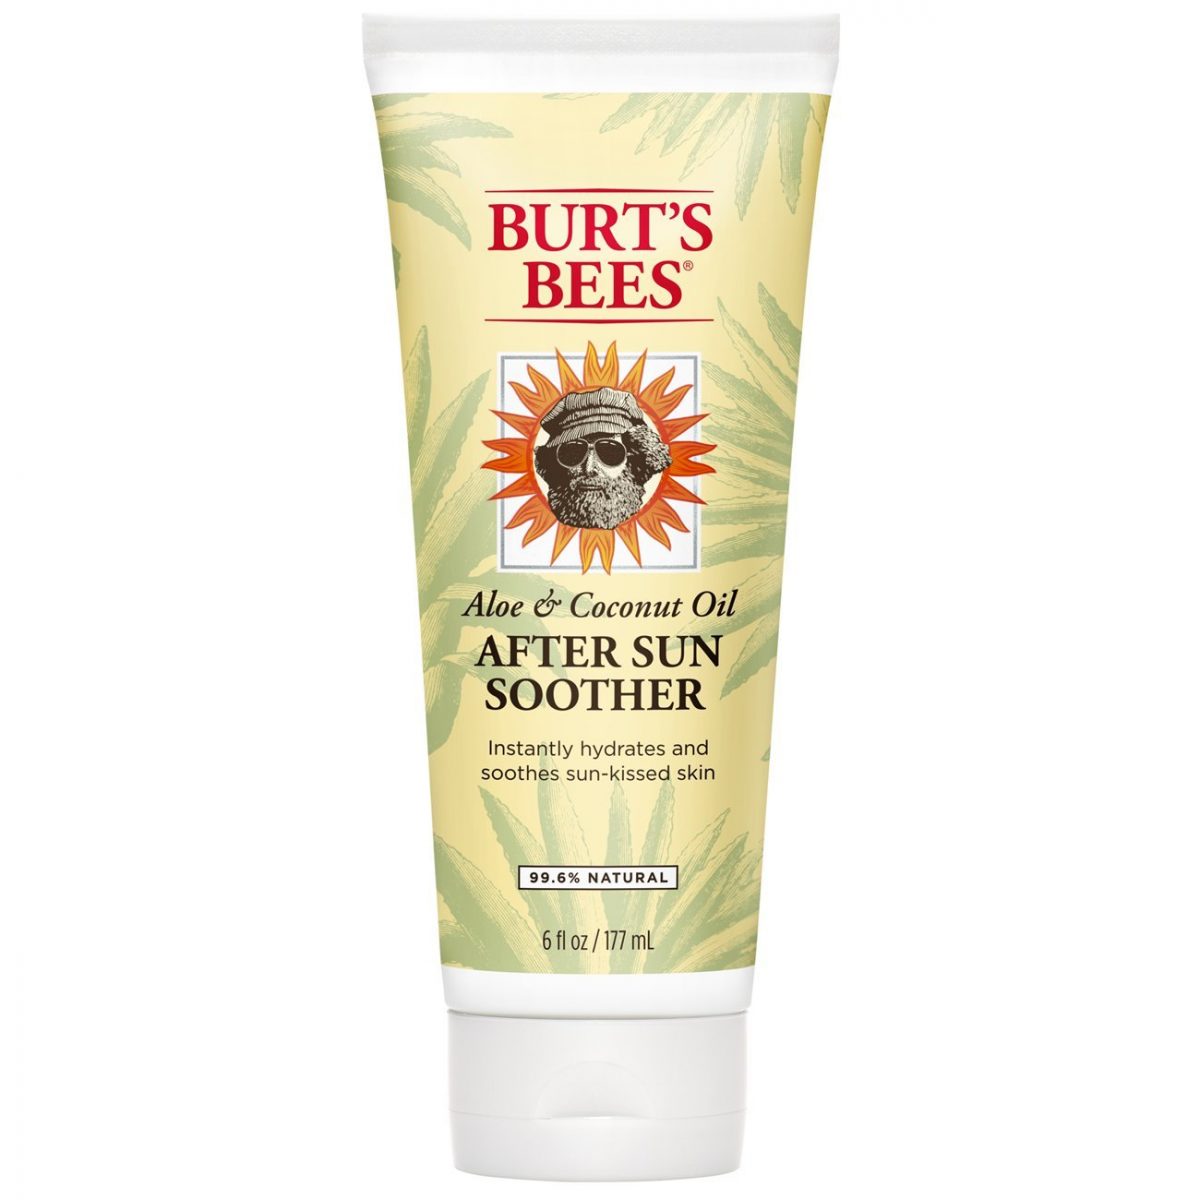 Burt’s Bees After Sun Soother